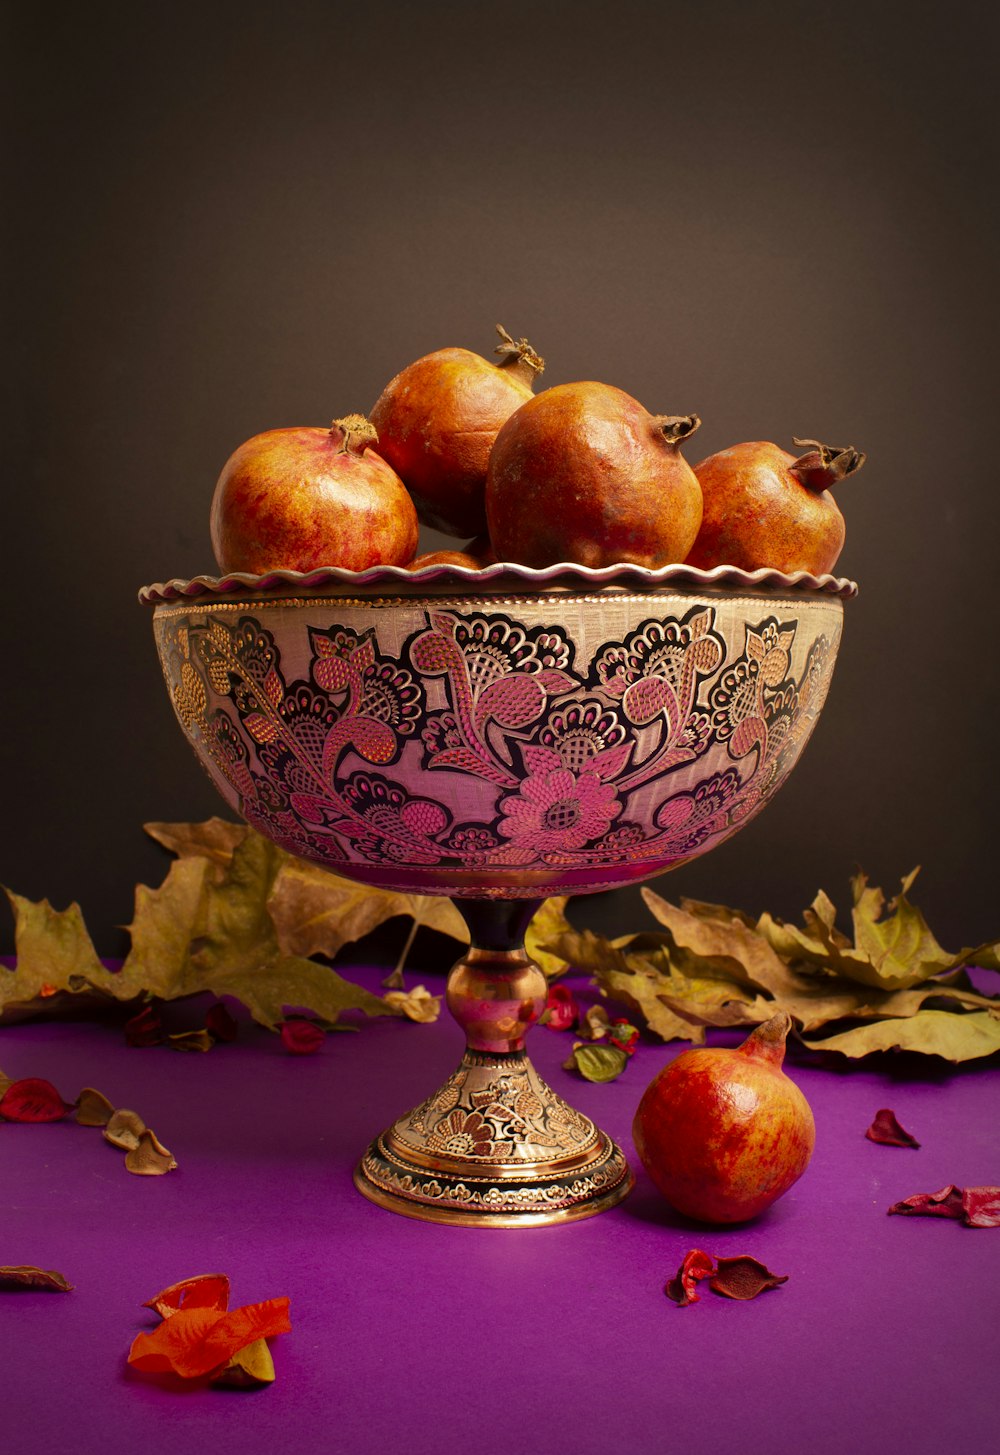 a bowl filled with apples sitting on top of a purple table